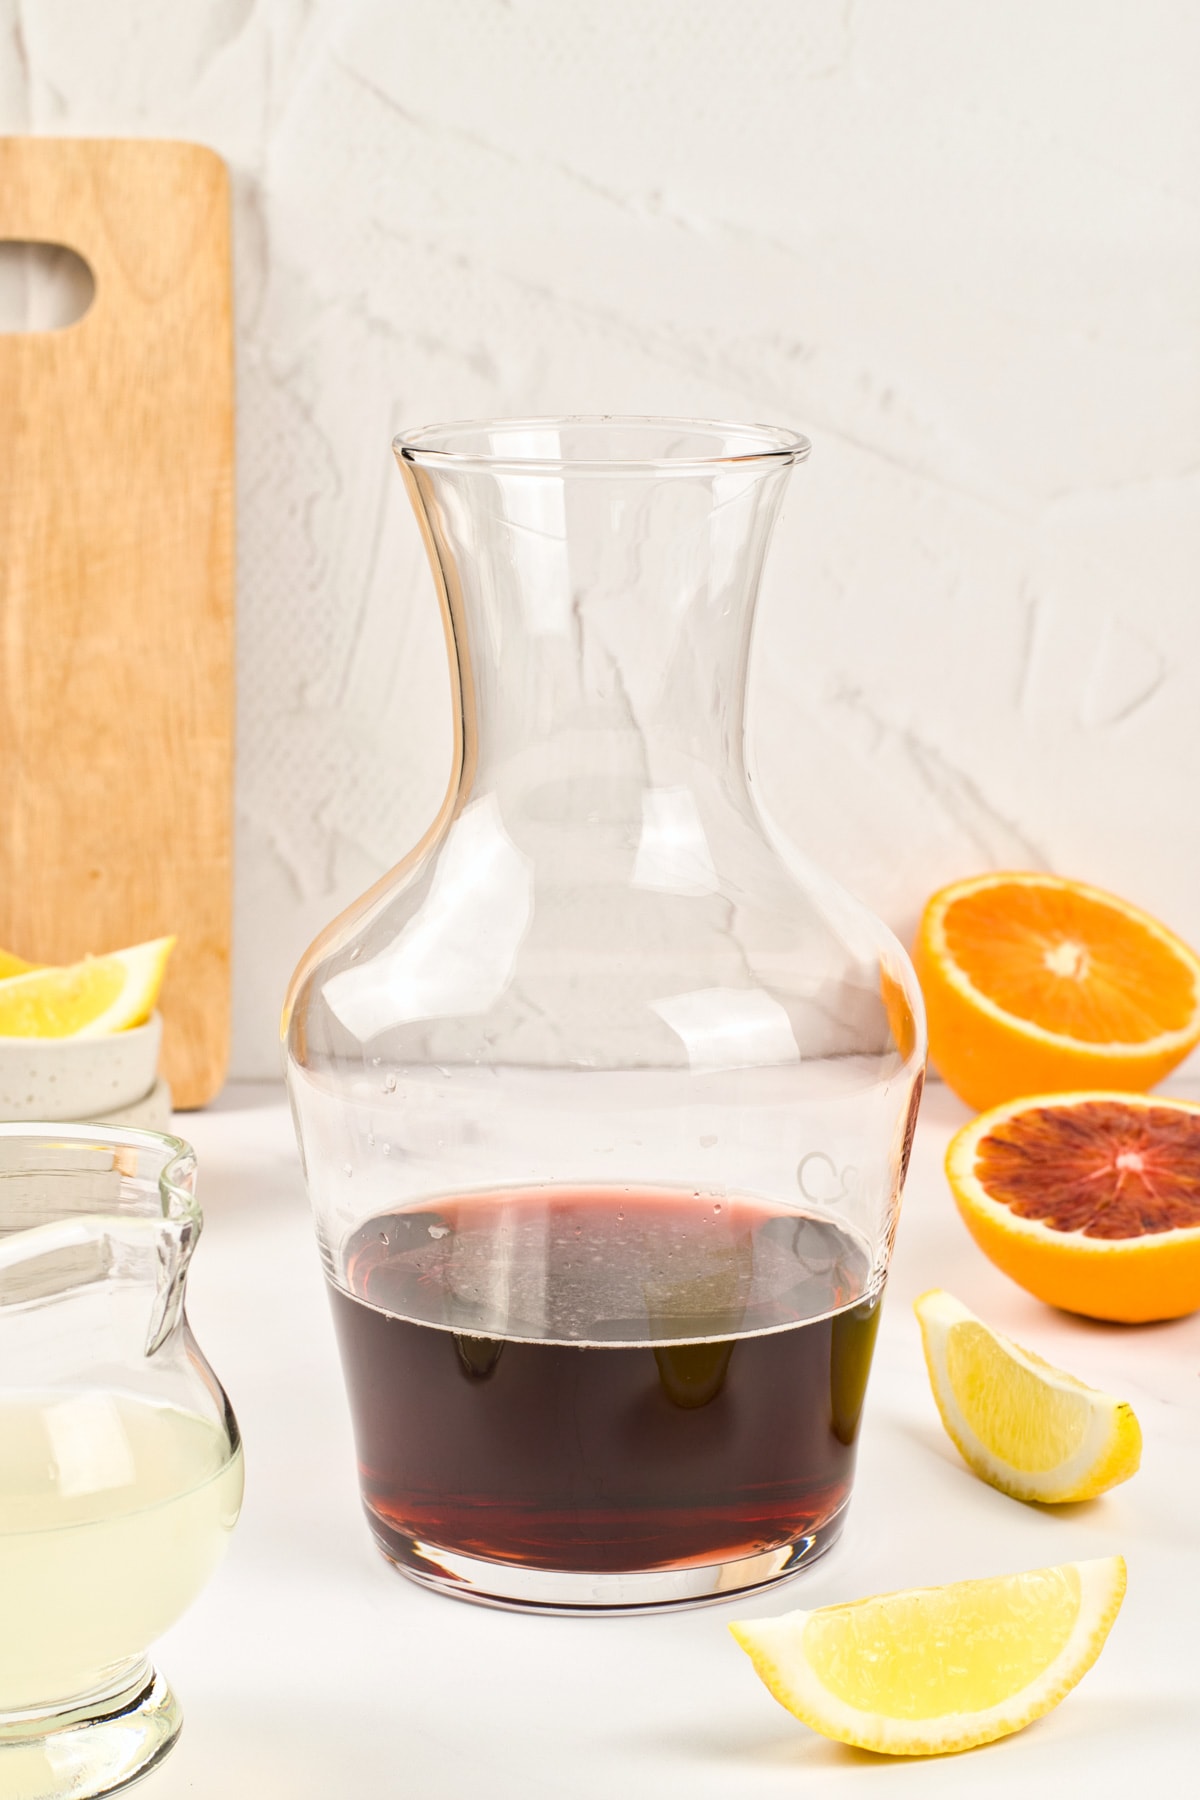 step 1 pour entire bottle of red wine into pitcher